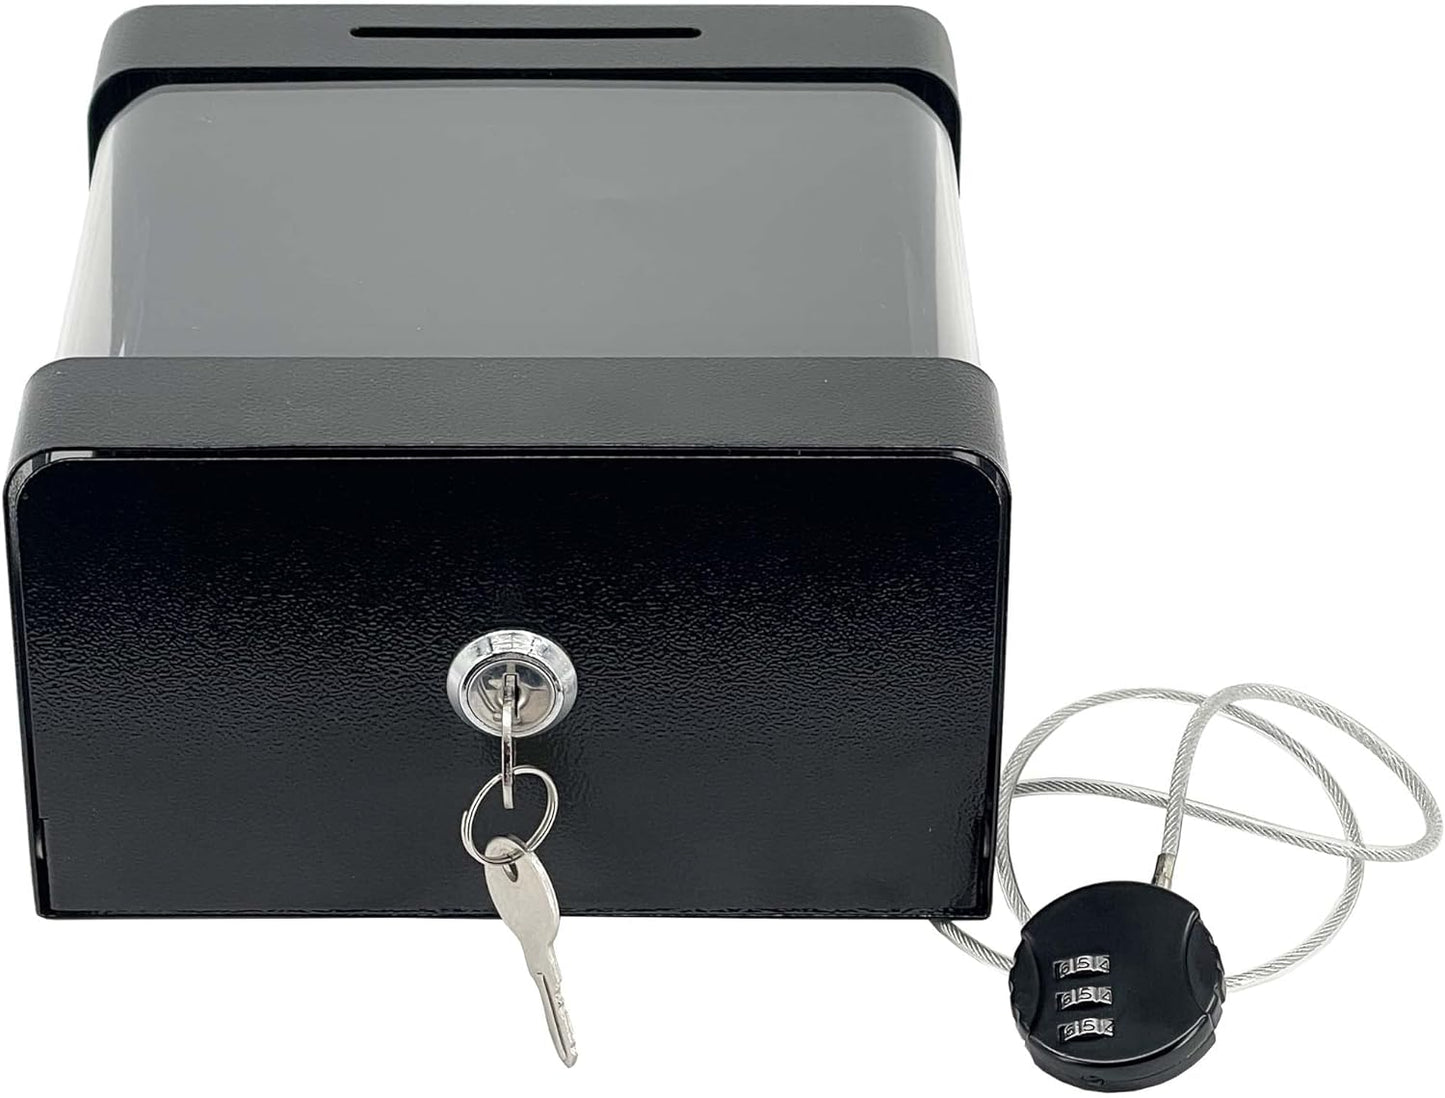 M-D8-H Steel Locking Tip Box - Heavy Duty Secure Tip Jar with Combination Cable Lock - Use for Collecting Donation, Suggestion, Business Card, and More